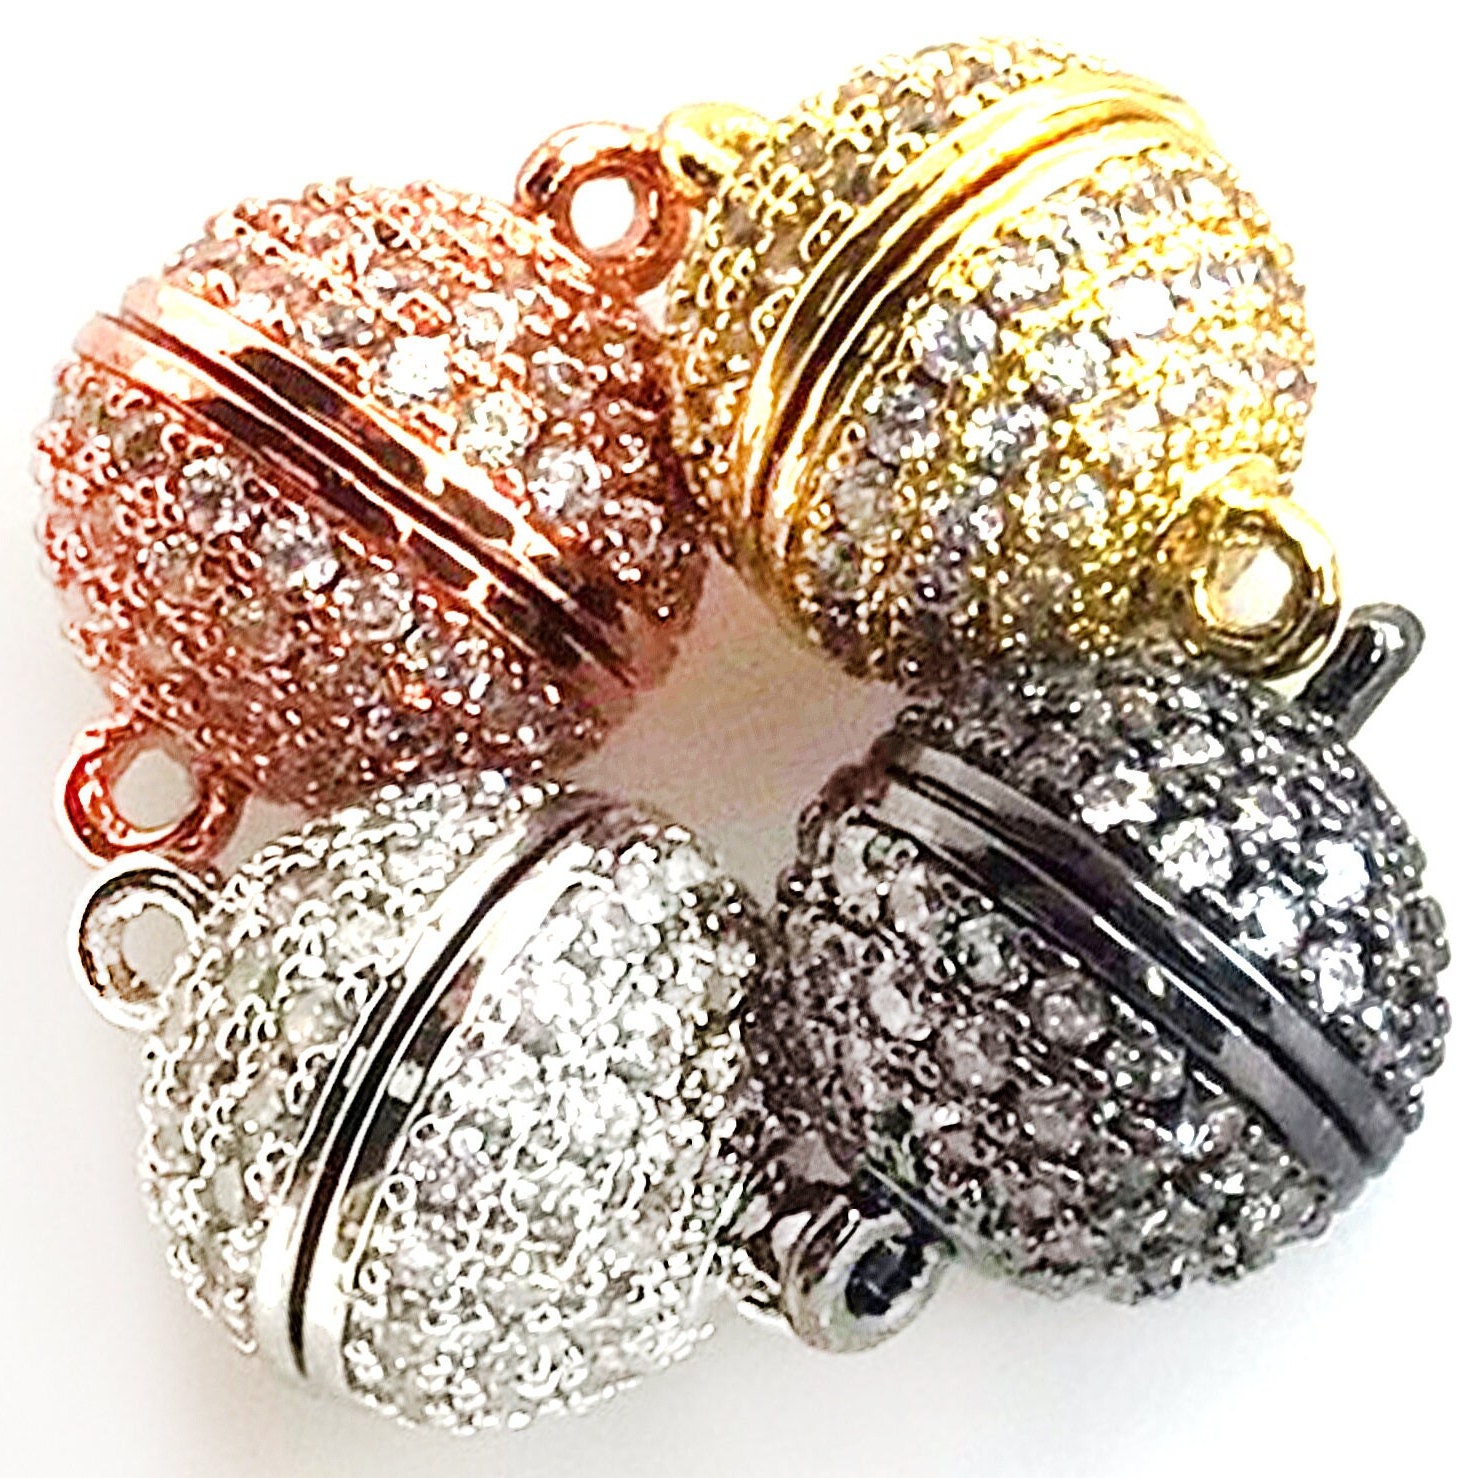 Magnetic jewelry clasps: How can my mom more easily manage the